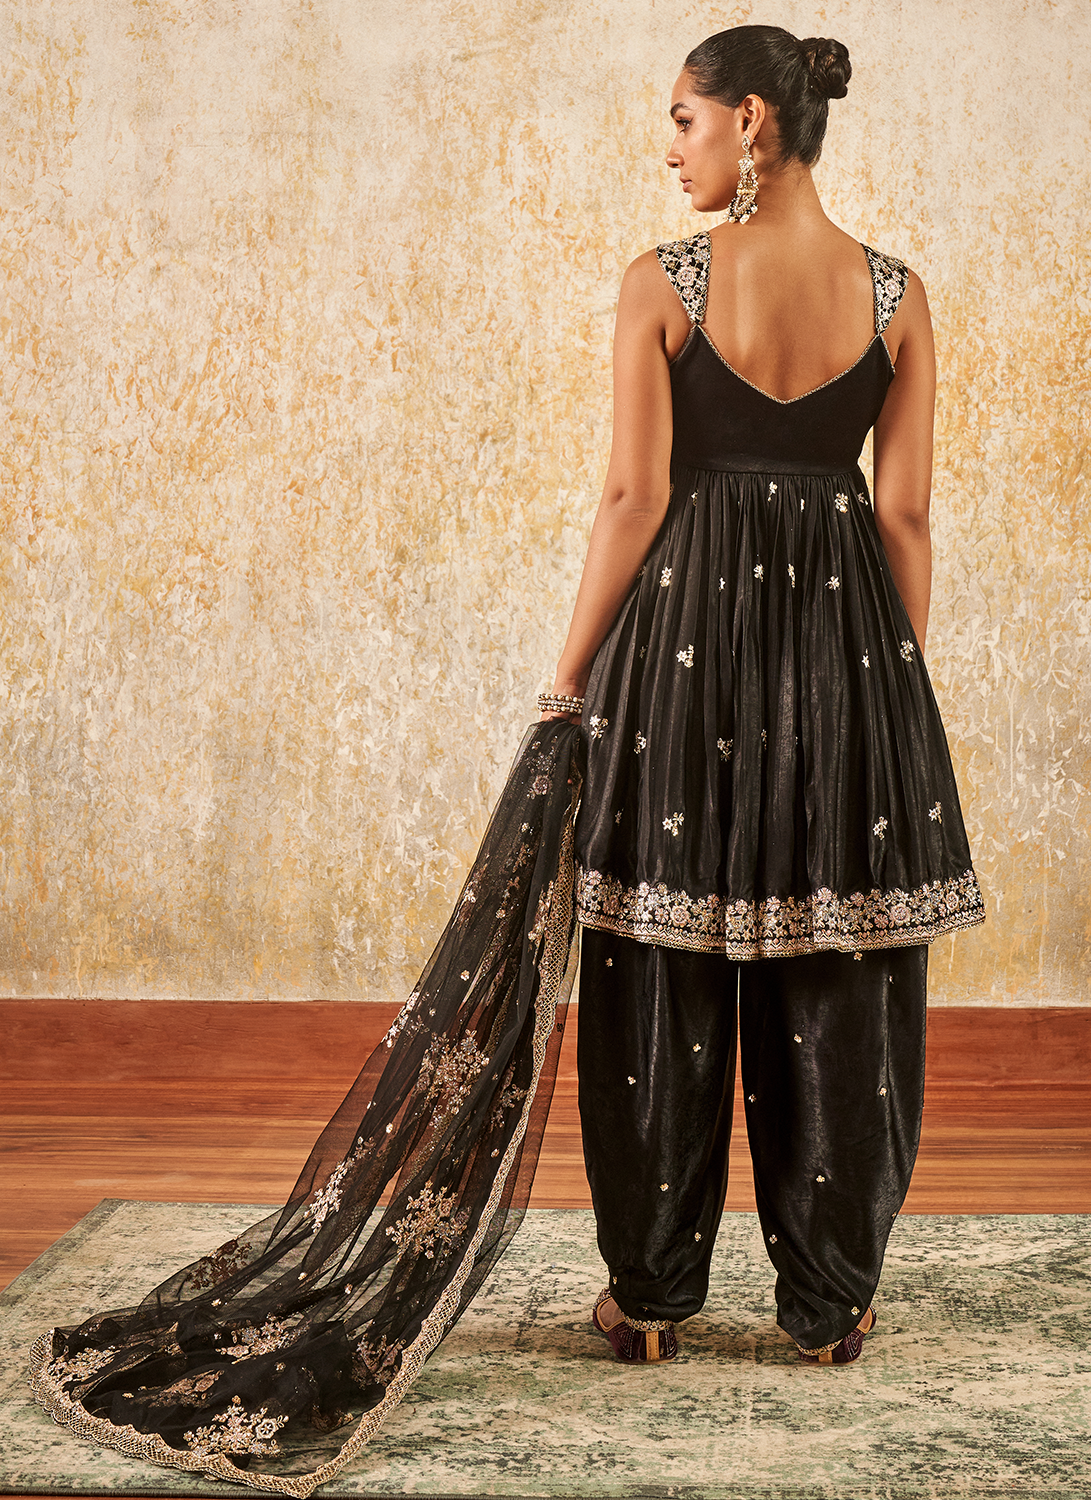 Black Embroidered Patiala Suit